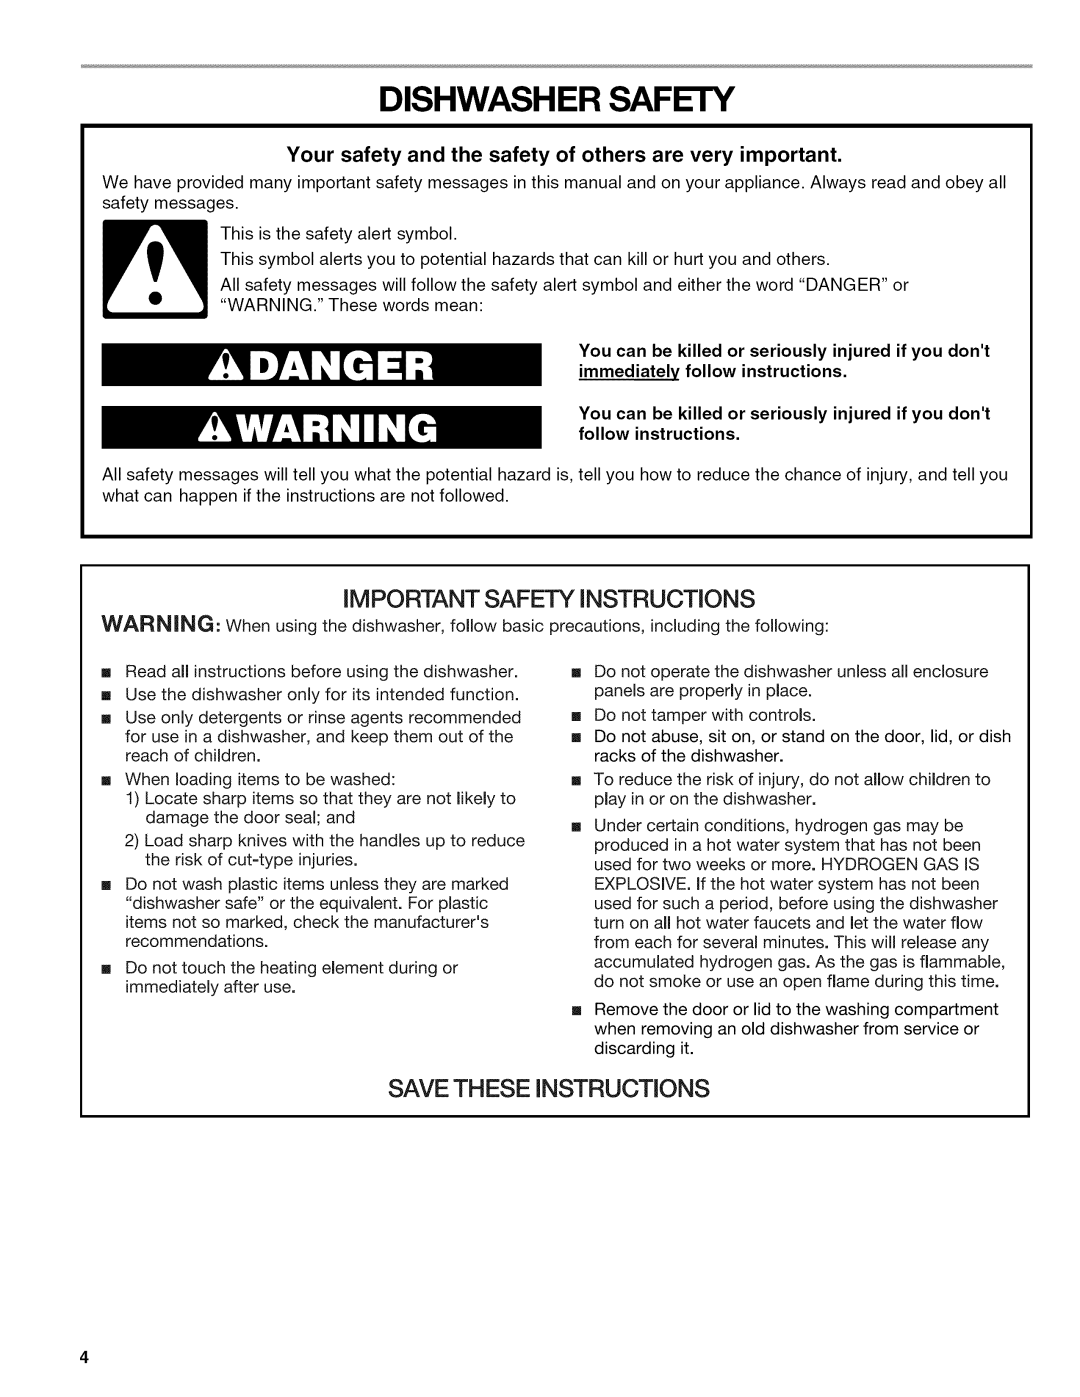 Kenmore 665.1622 manual Dishwasher Safety, iMPORTANT SAFETY iNSTRUCTiONS, SAVE THESE iNSTRUCTiONS 